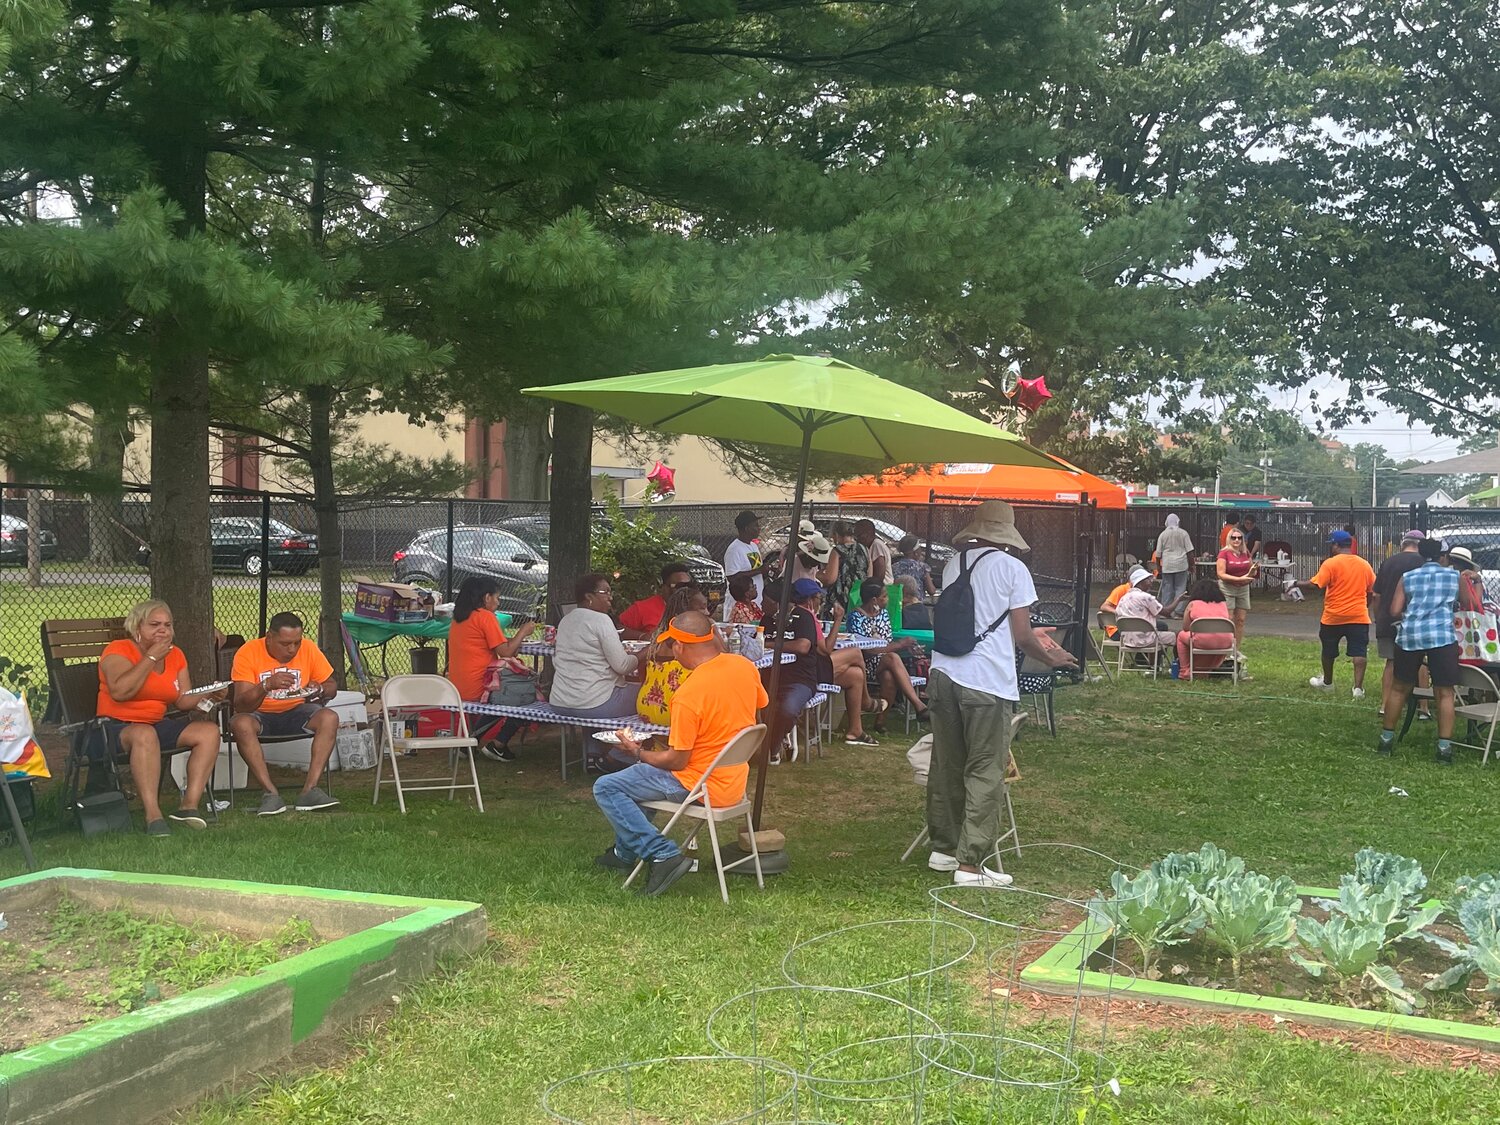 Attendees sitting and enjoying the free food and drinks, music, and getting ready to harvest the fresh fruit and vegetables straight from the earth of the garden to their hands.